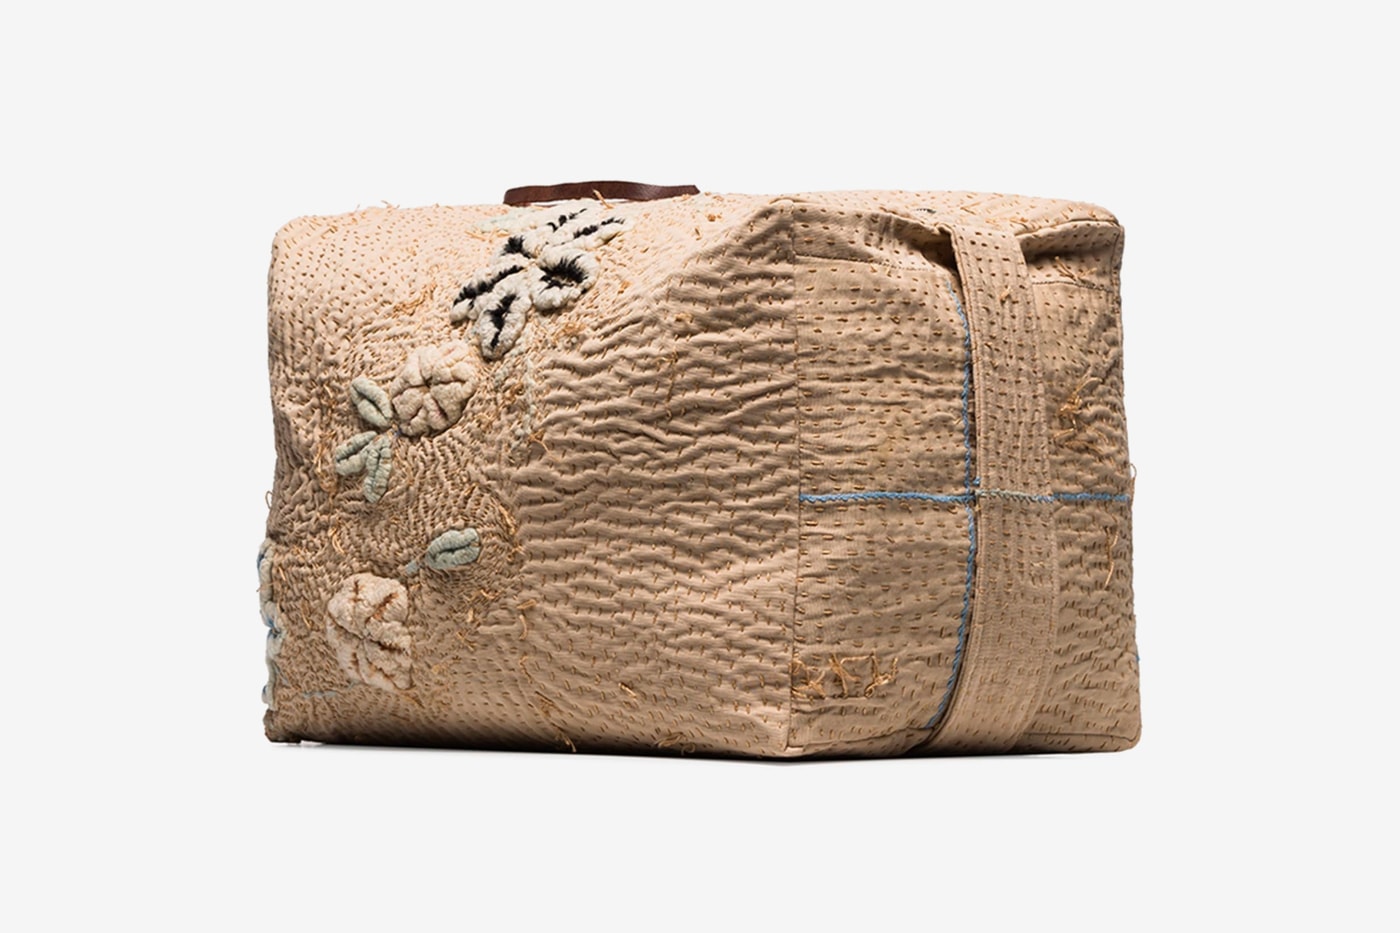 By Walid Beige Tapestry Messenger Bag Release  browns browns fashion bags Sashiko boro 